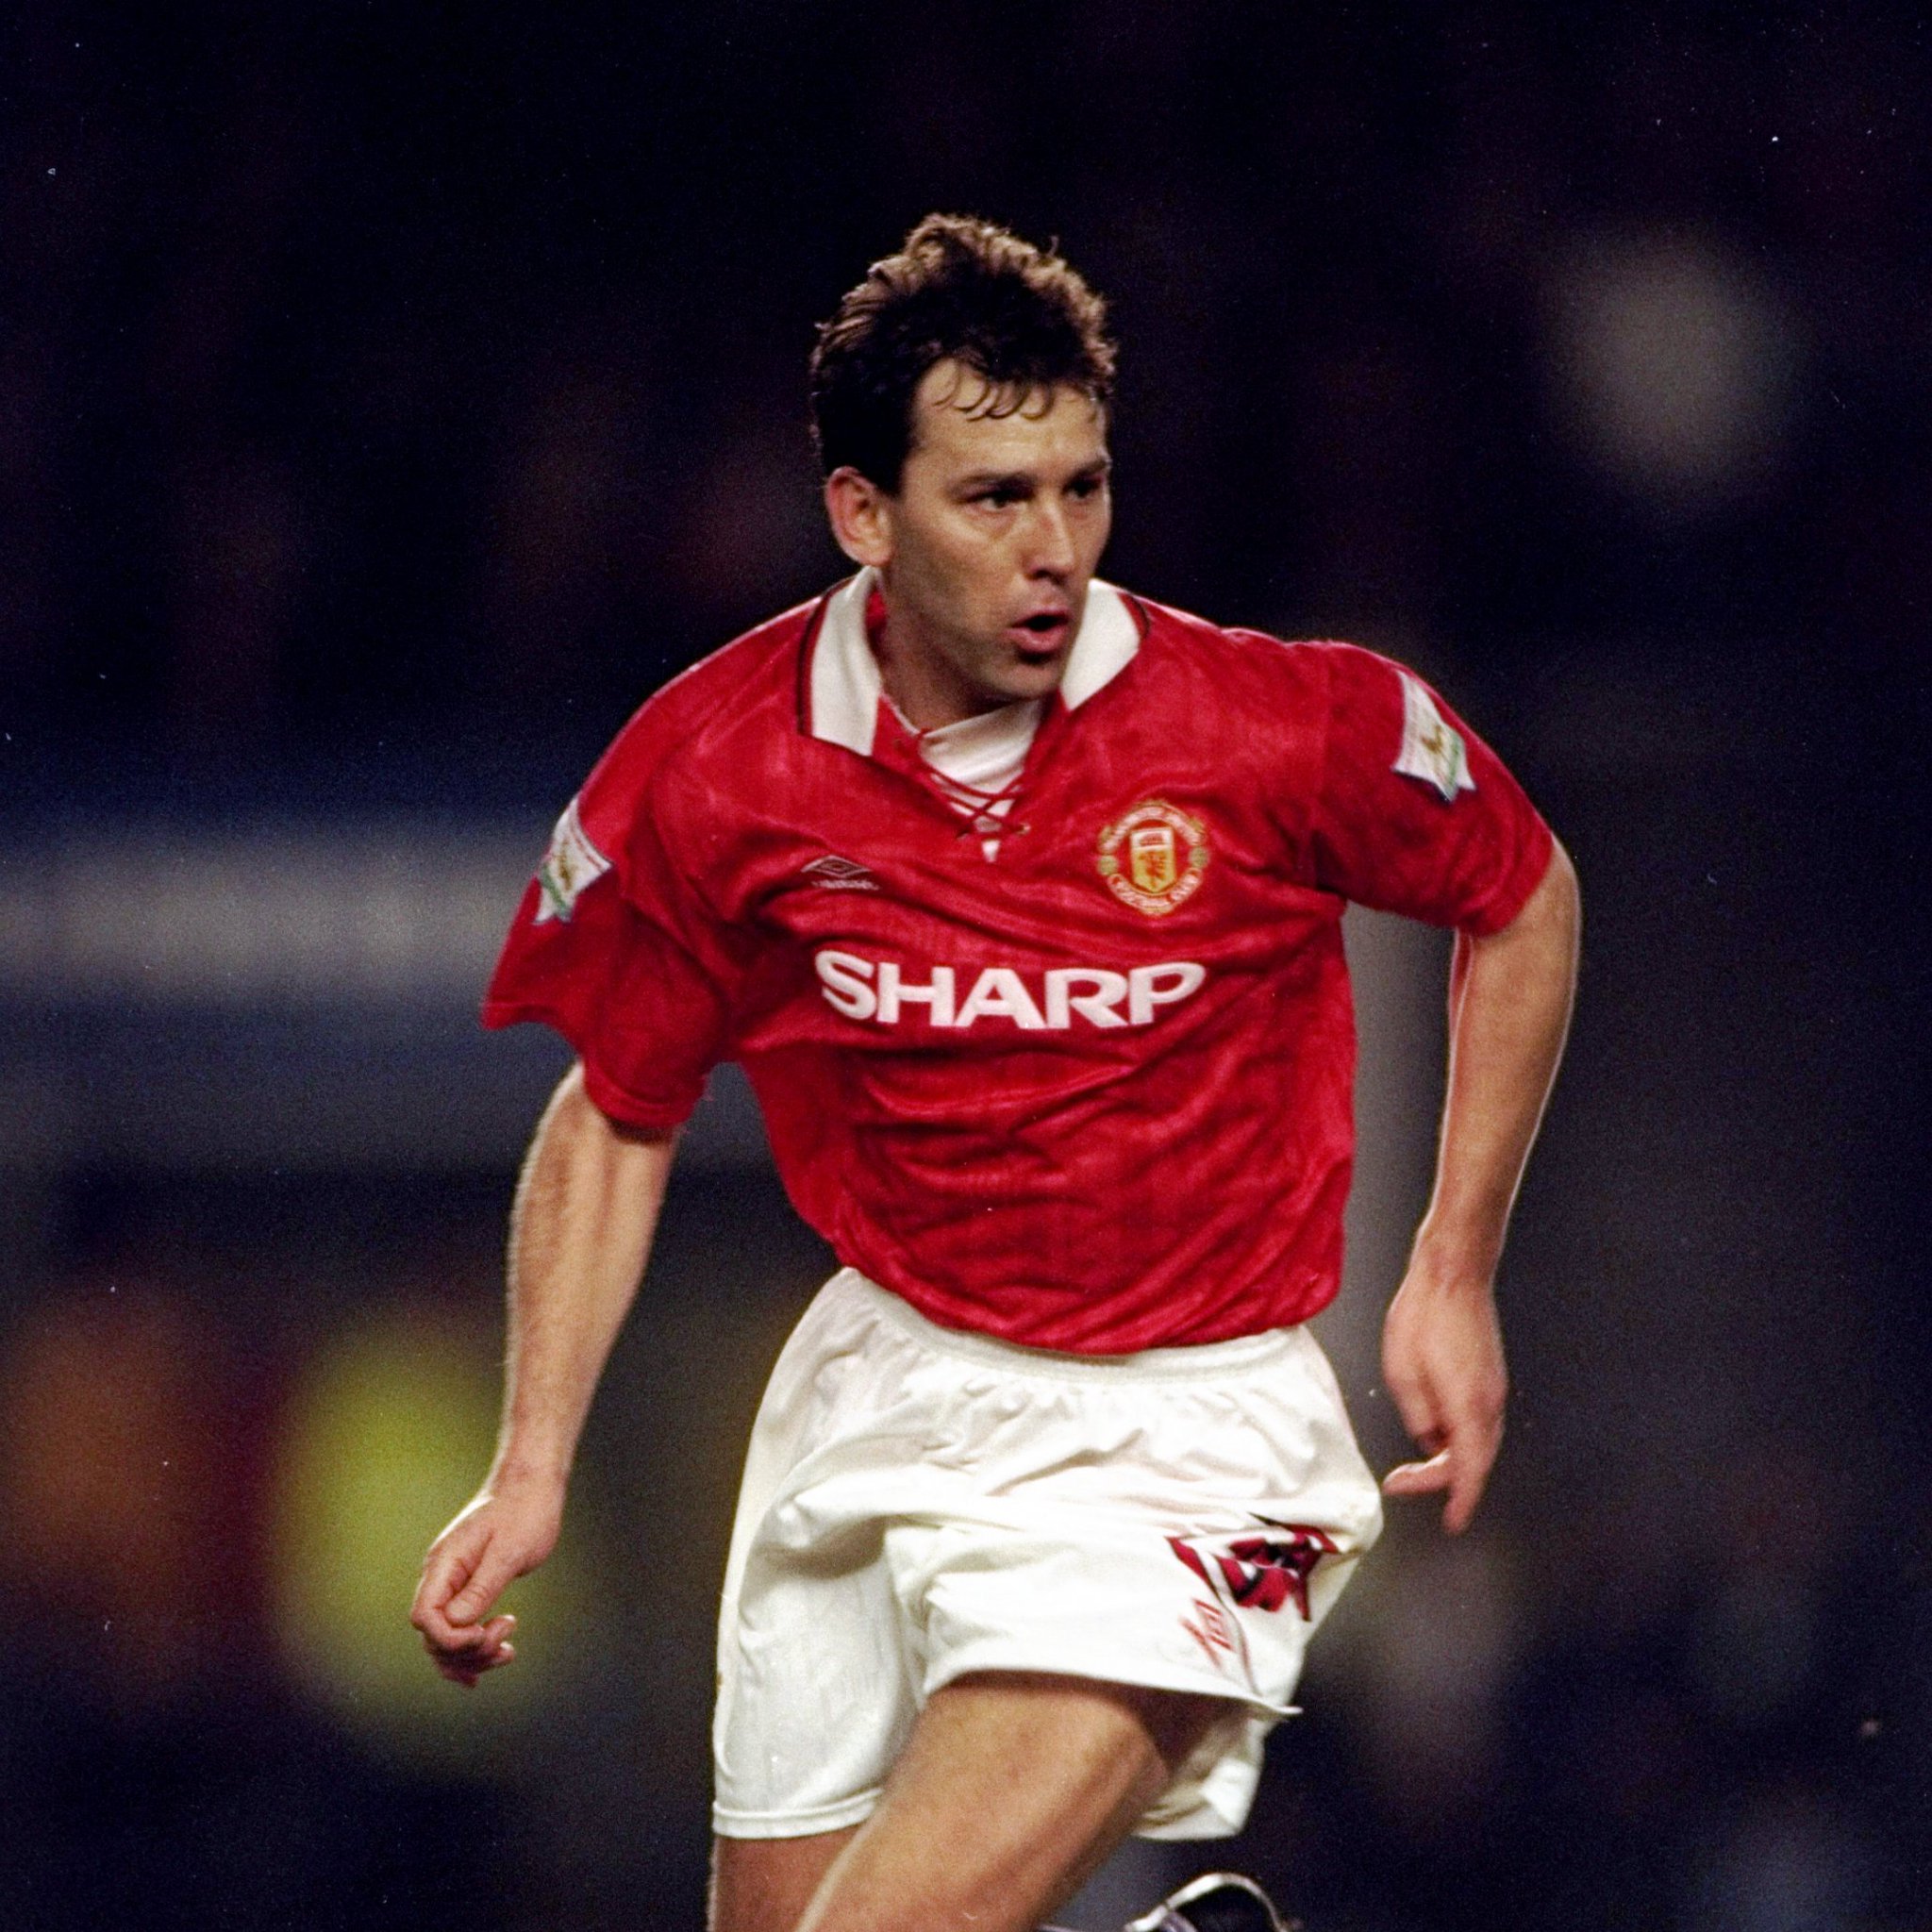                  Happy Birthday to 3  x FA Cup winner and       , Bryan Robson 